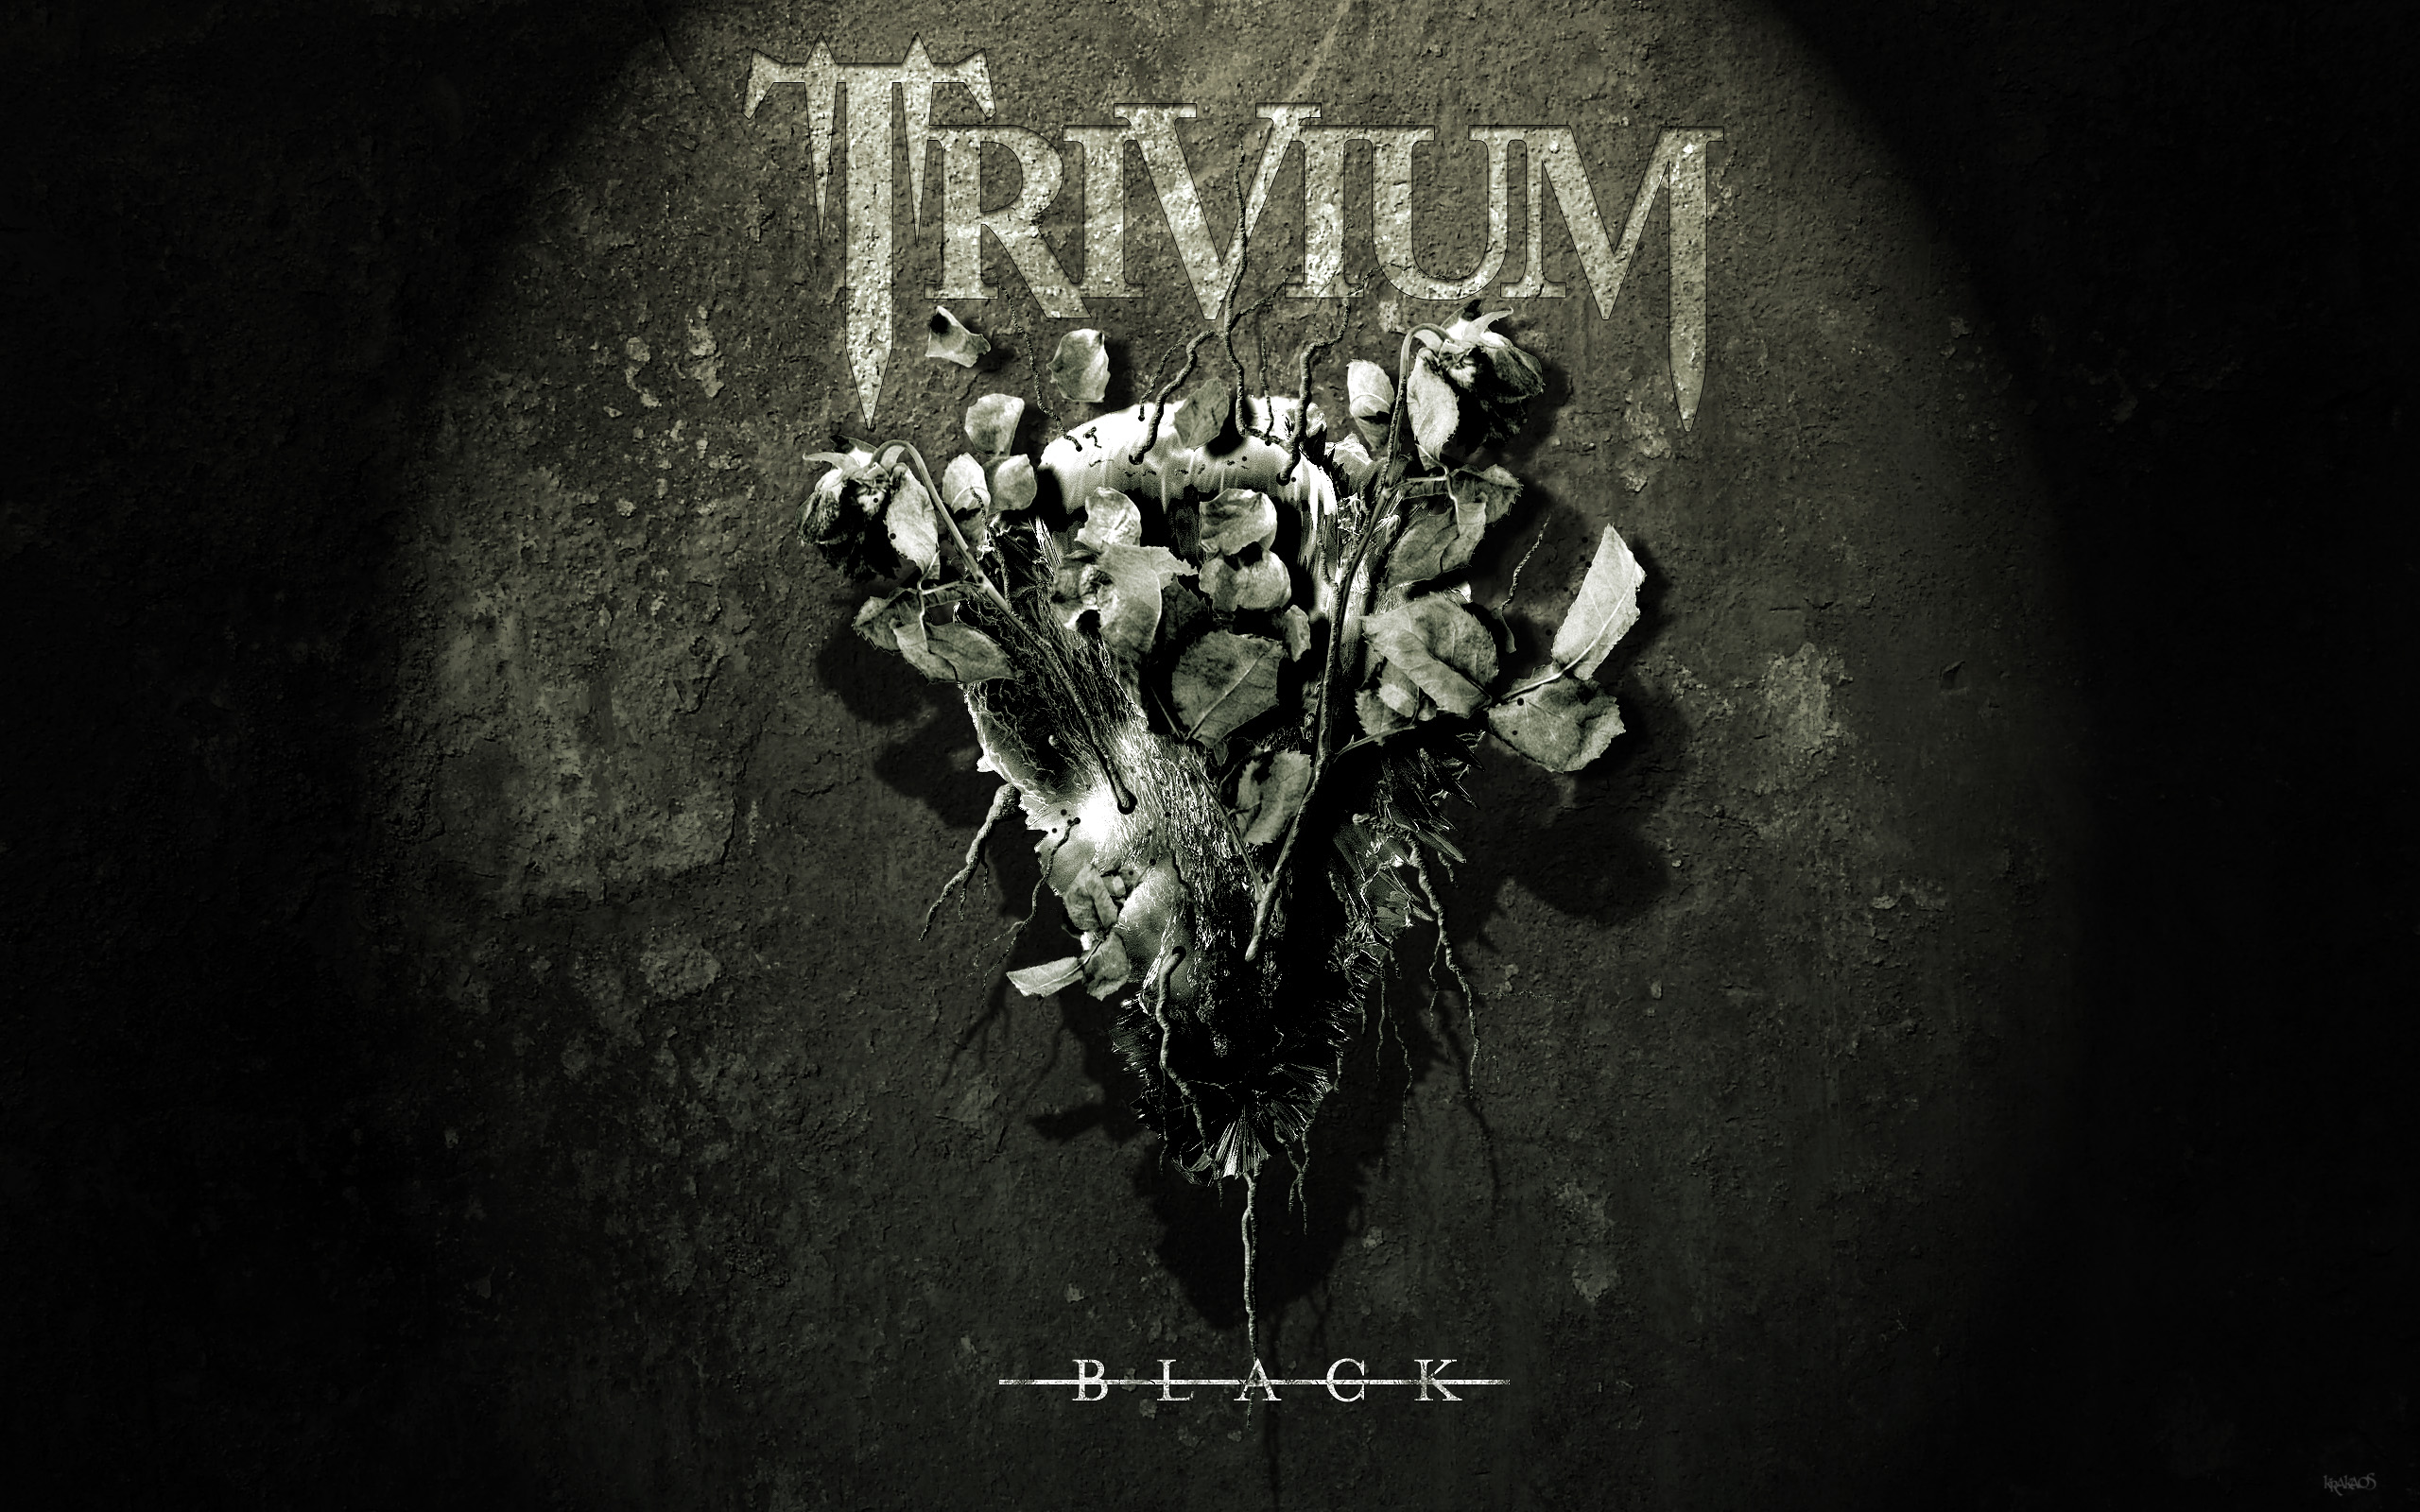 Free Download Trivium Wallpapers And Artworks 2560x1600 For Your Images, Photos, Reviews